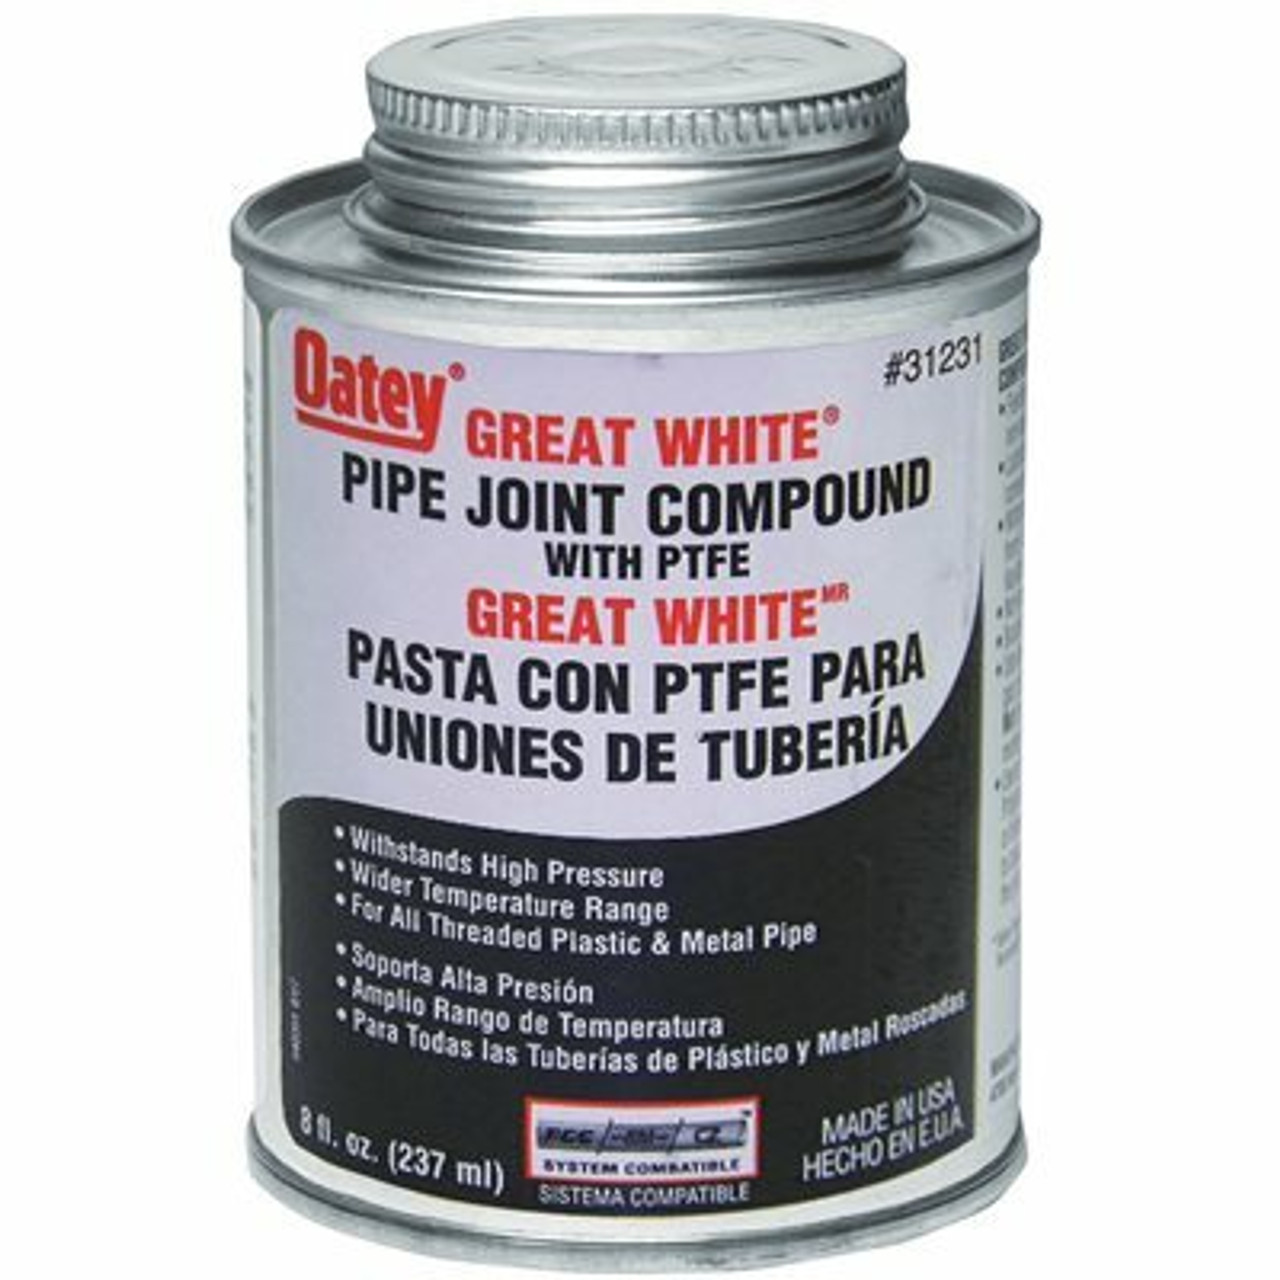 Oatey Great White 8 Oz. Pipe Joint Compound